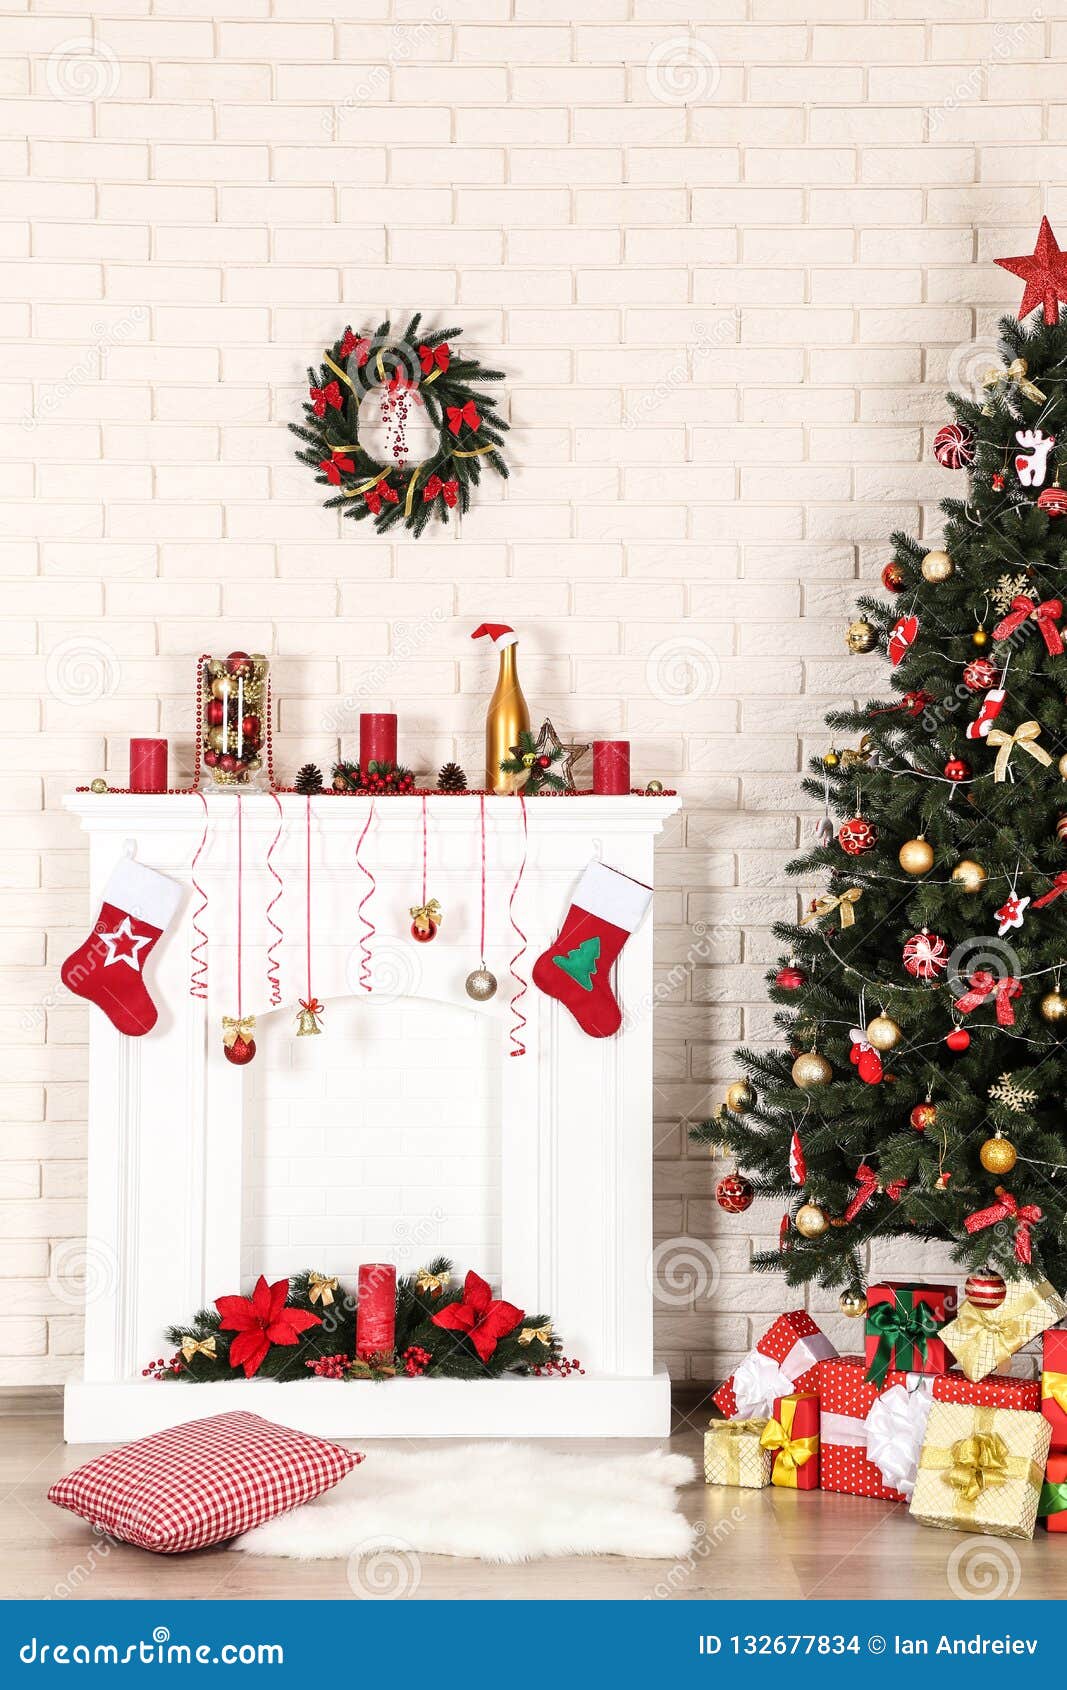 Decorated Fireplace With Christmas Tree Stock Photo - Image of december, colorful: 132677834